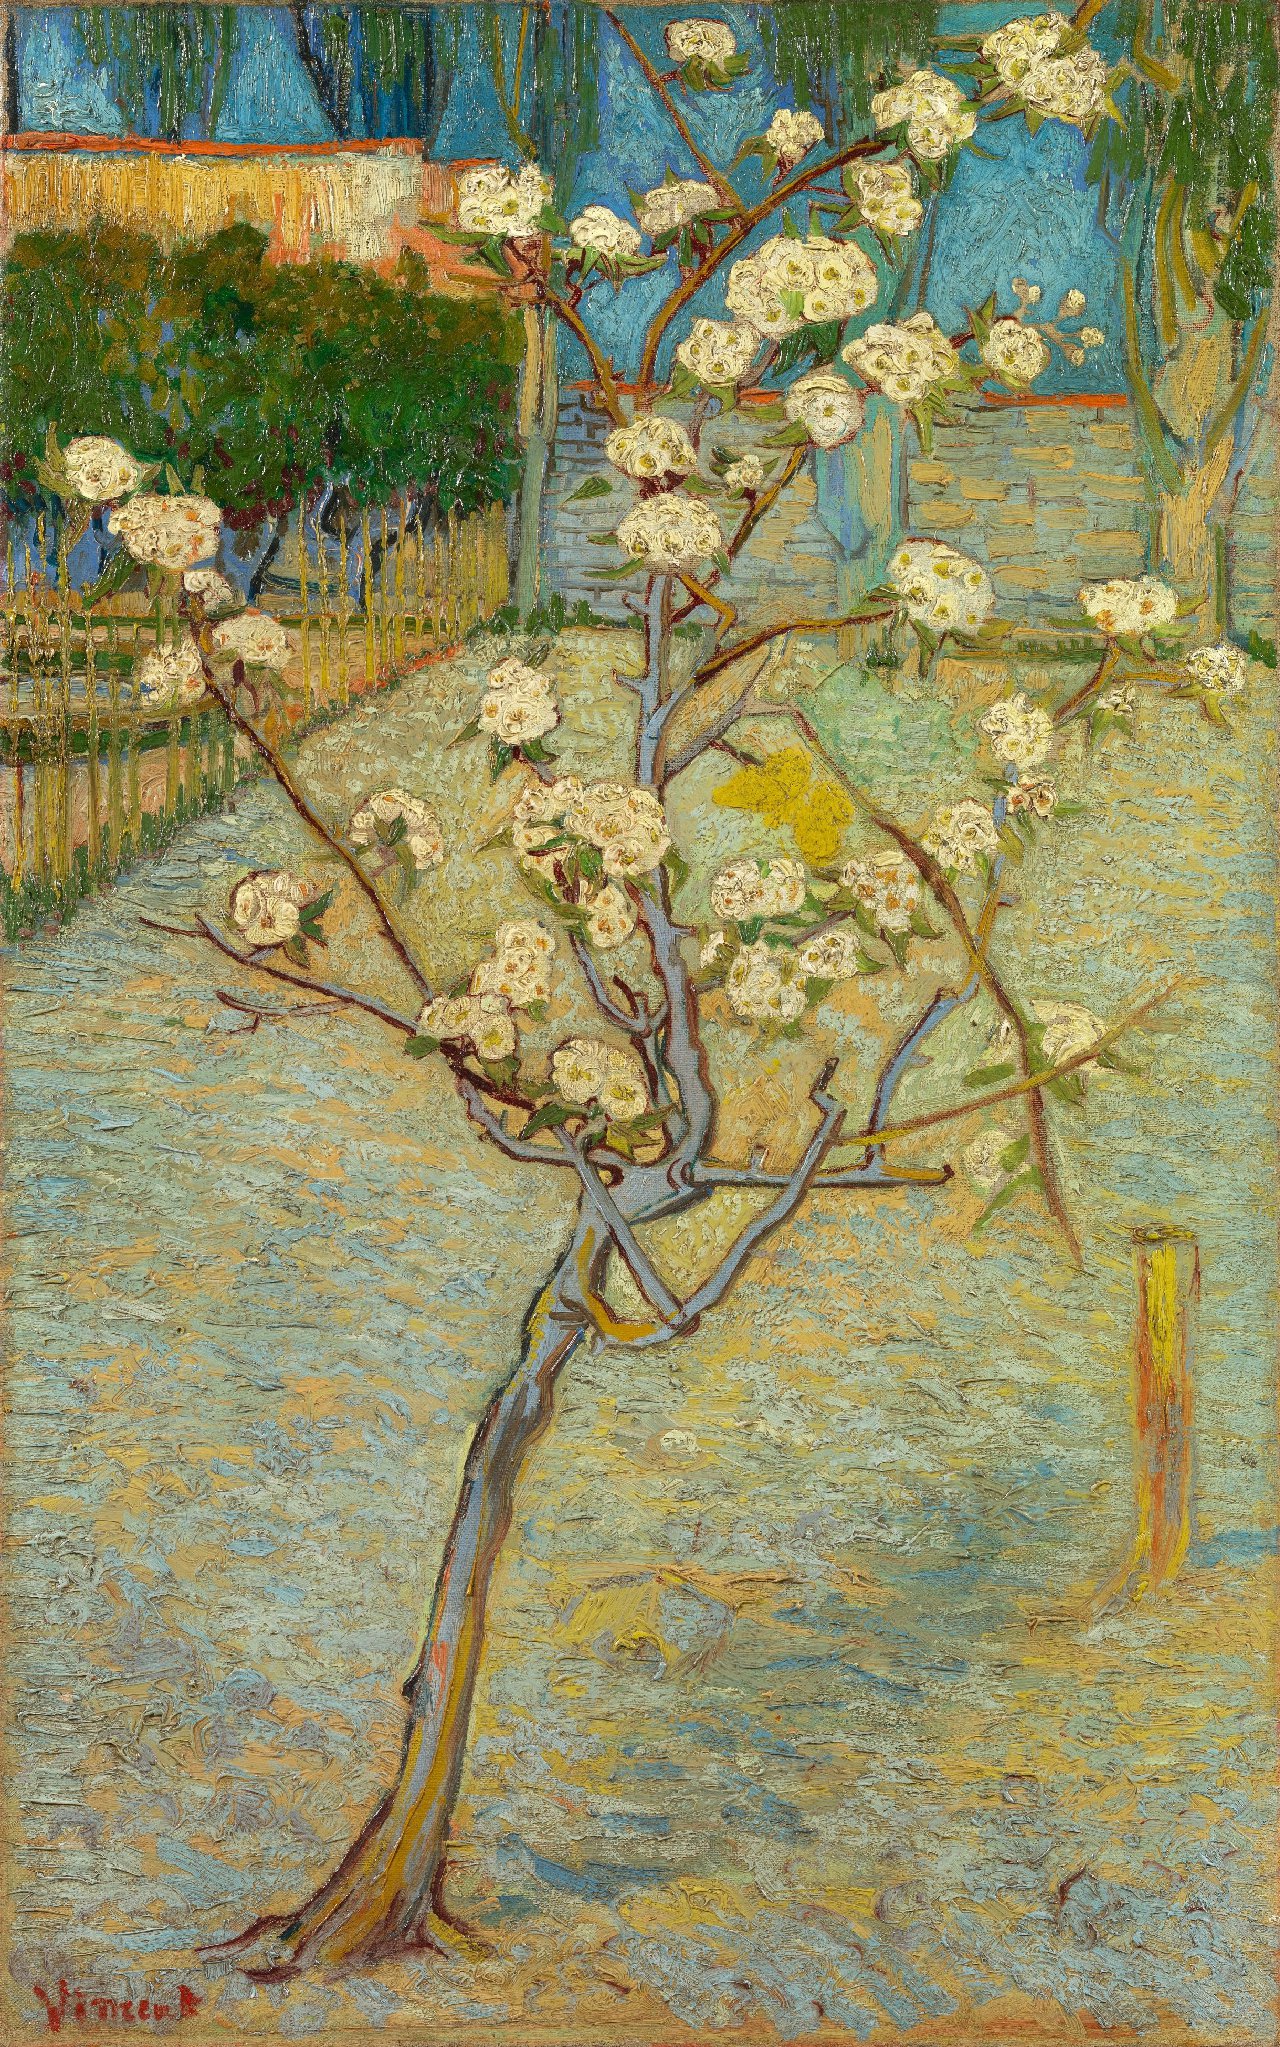 Small Pear Tree in Blossom by Vincent van Gogh - April 1888 - 73.6 x 46.3 cm Van Gogh Museum